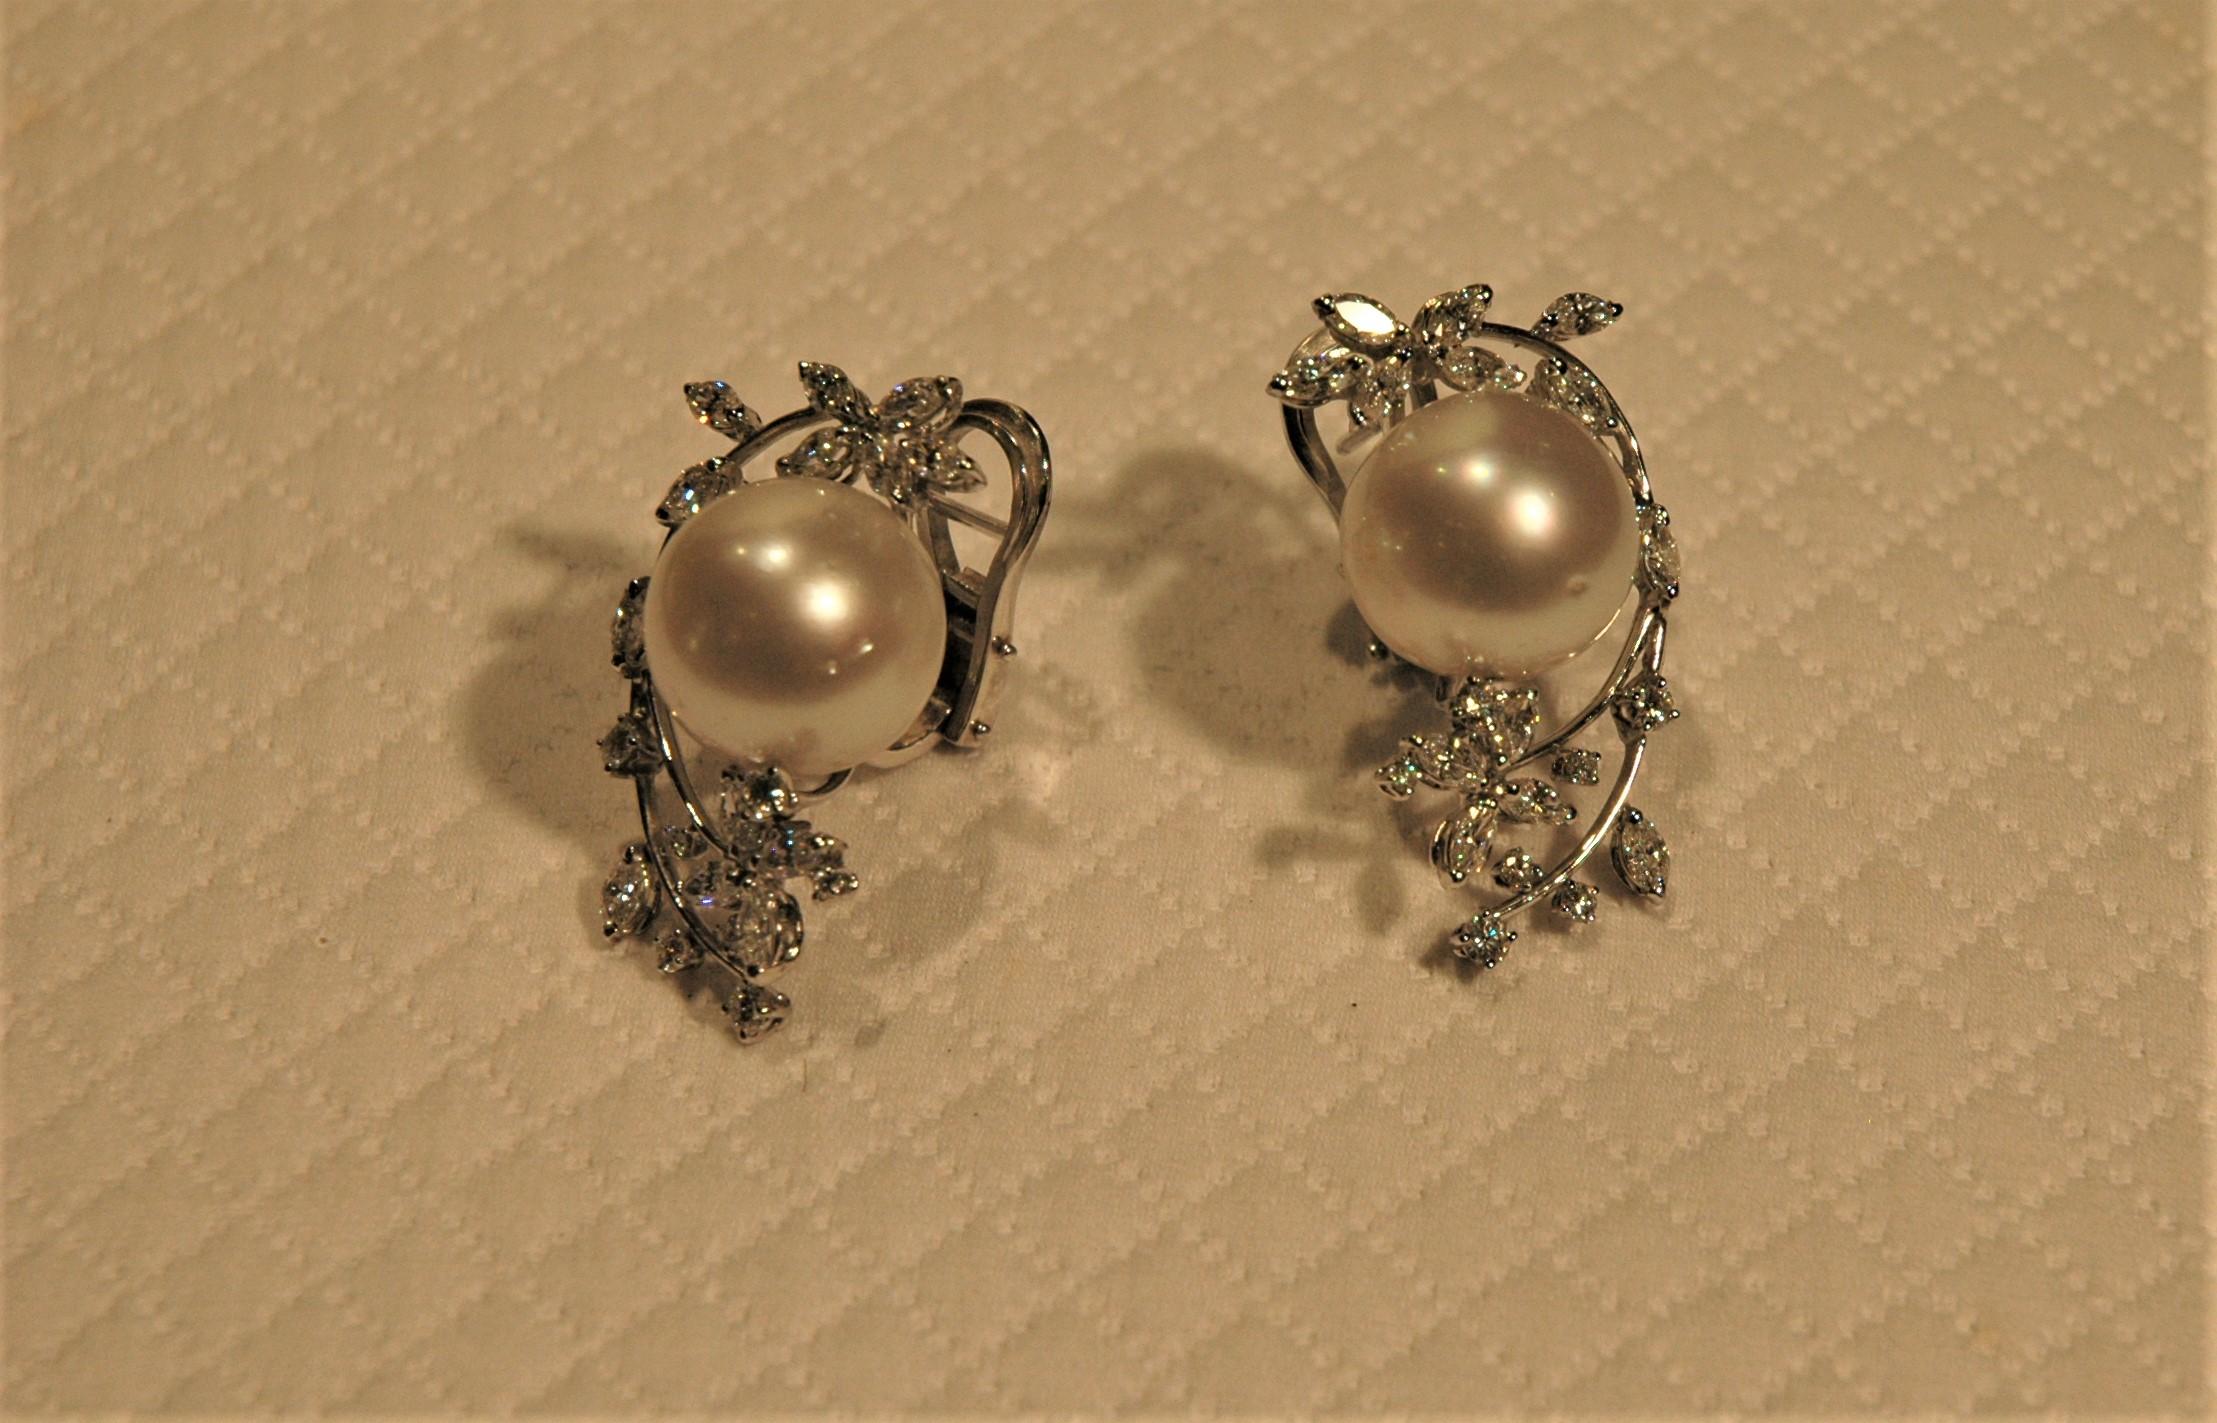 Women's Stud Earrings 18 Kt White Gold, 2.89 Carats Diamonds and White Australian Pearls For Sale